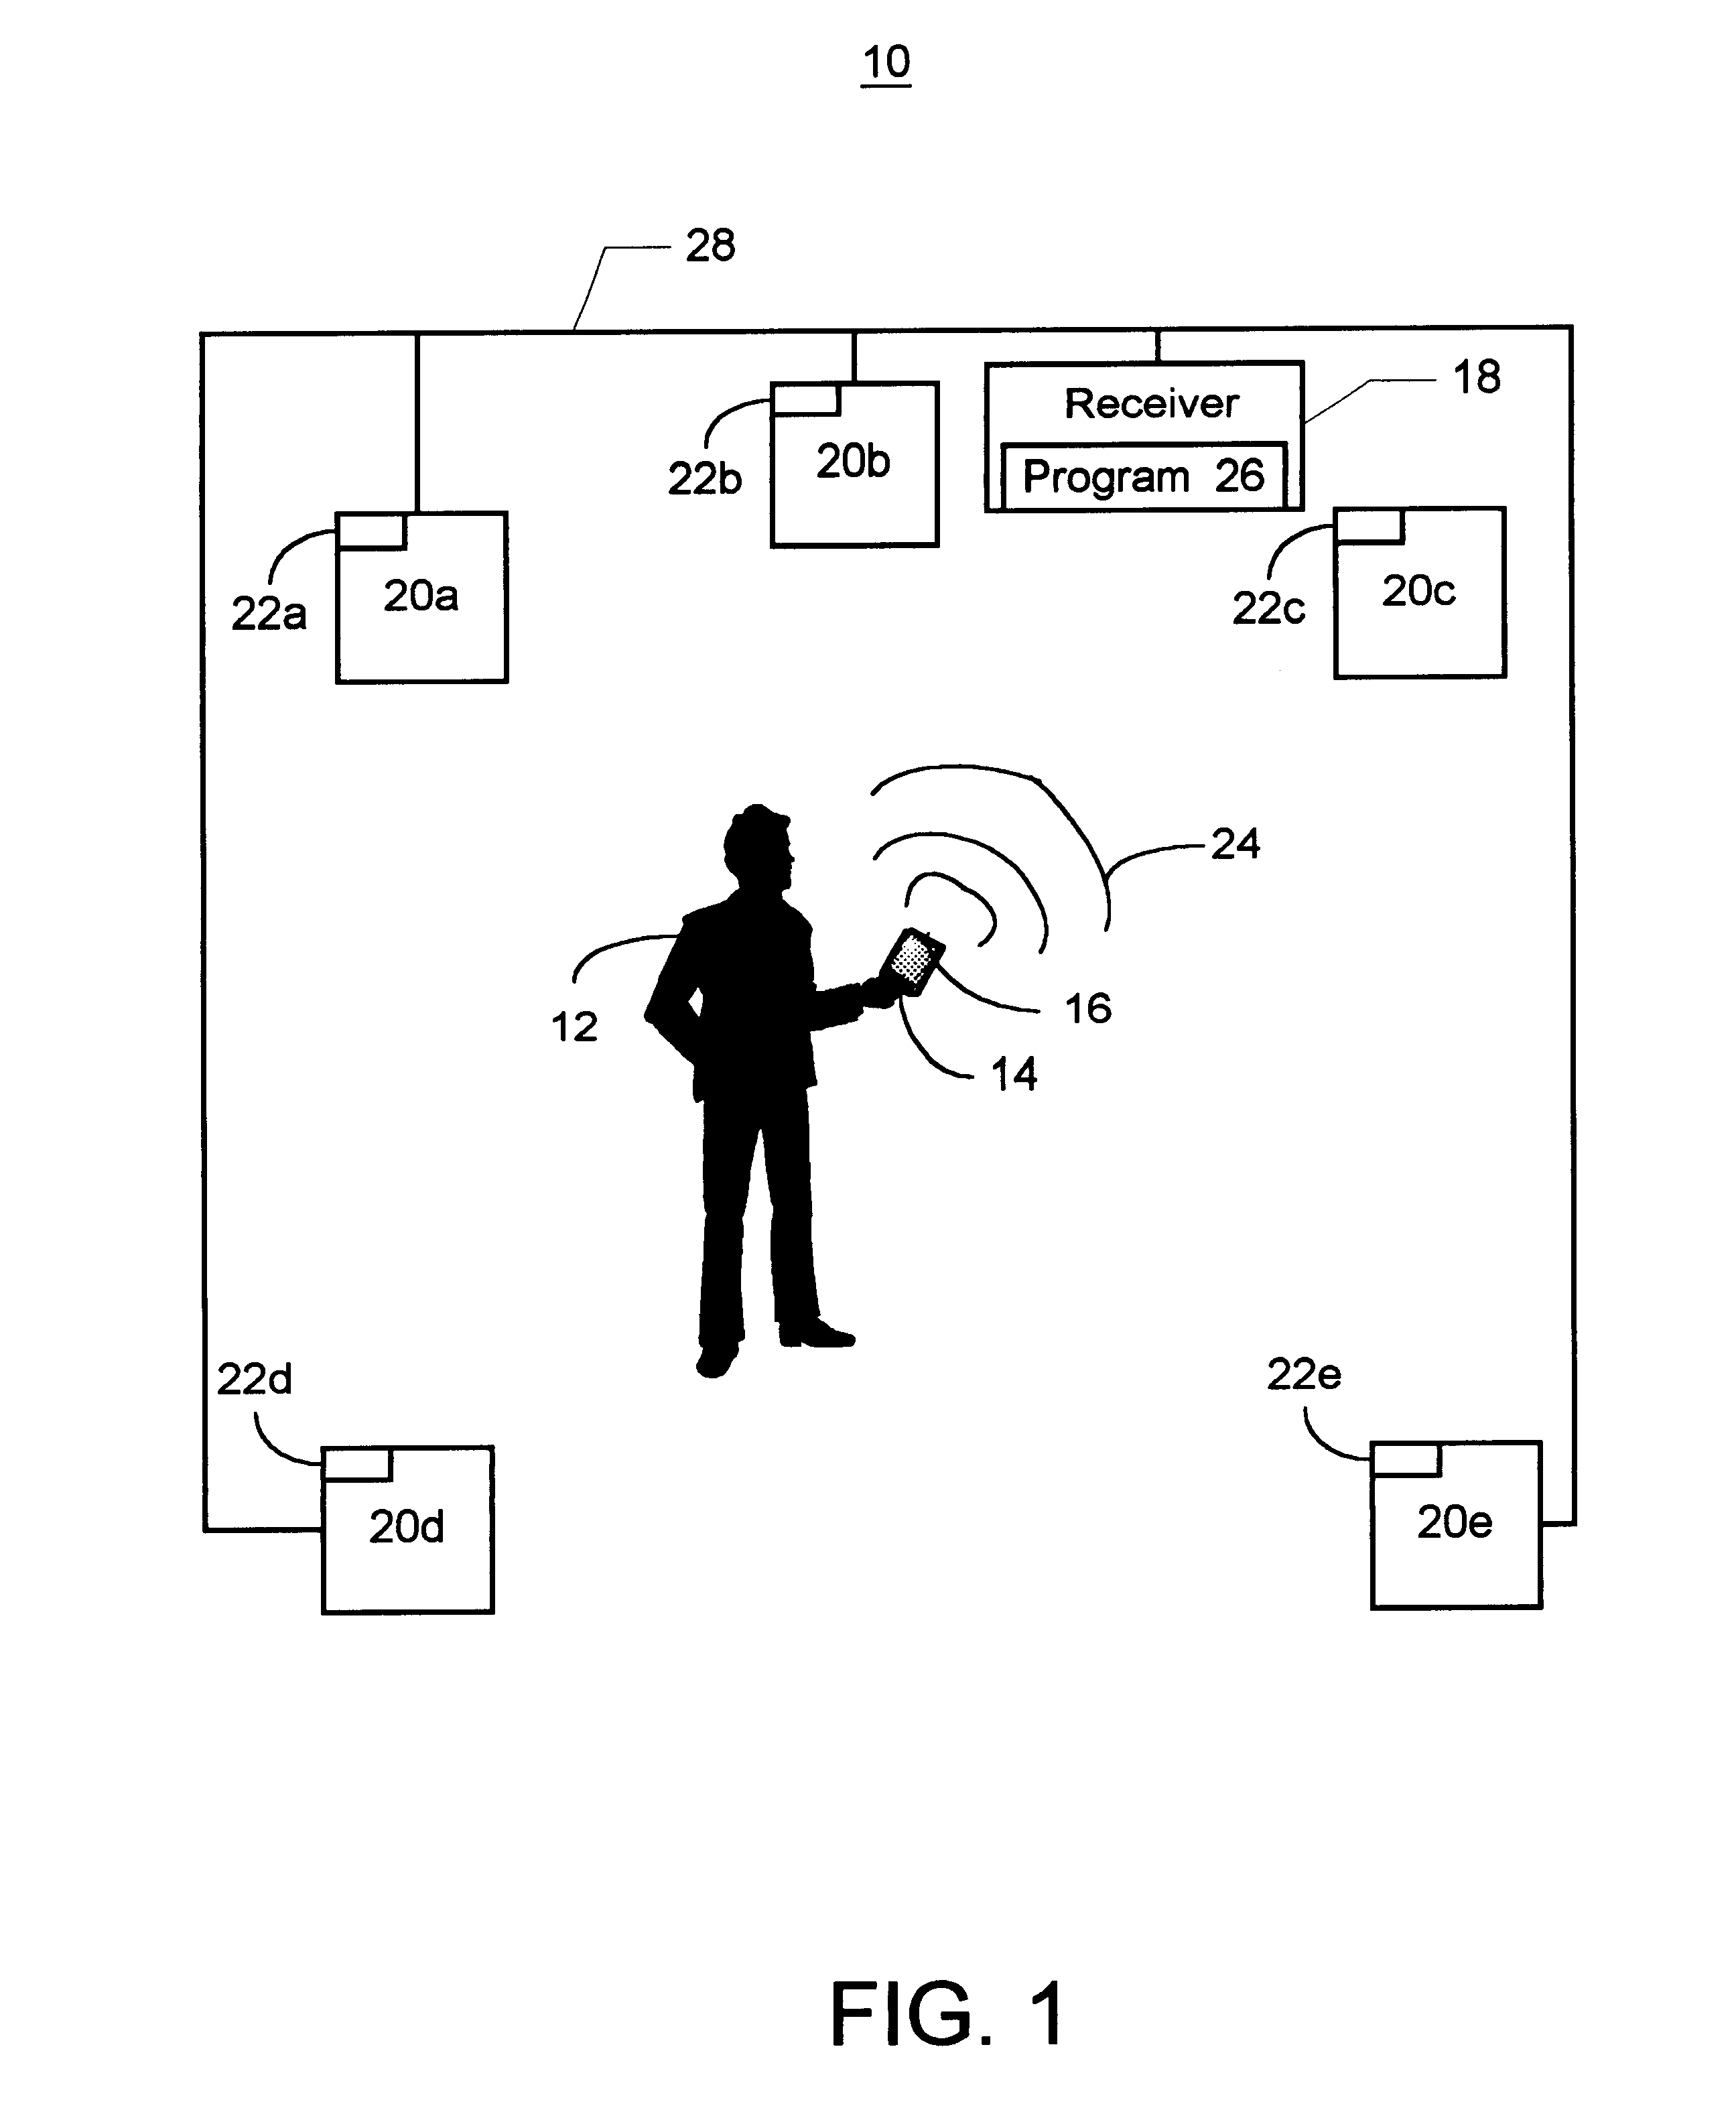 Method and system for automatic reconfiguration of a multi-dimension sound system